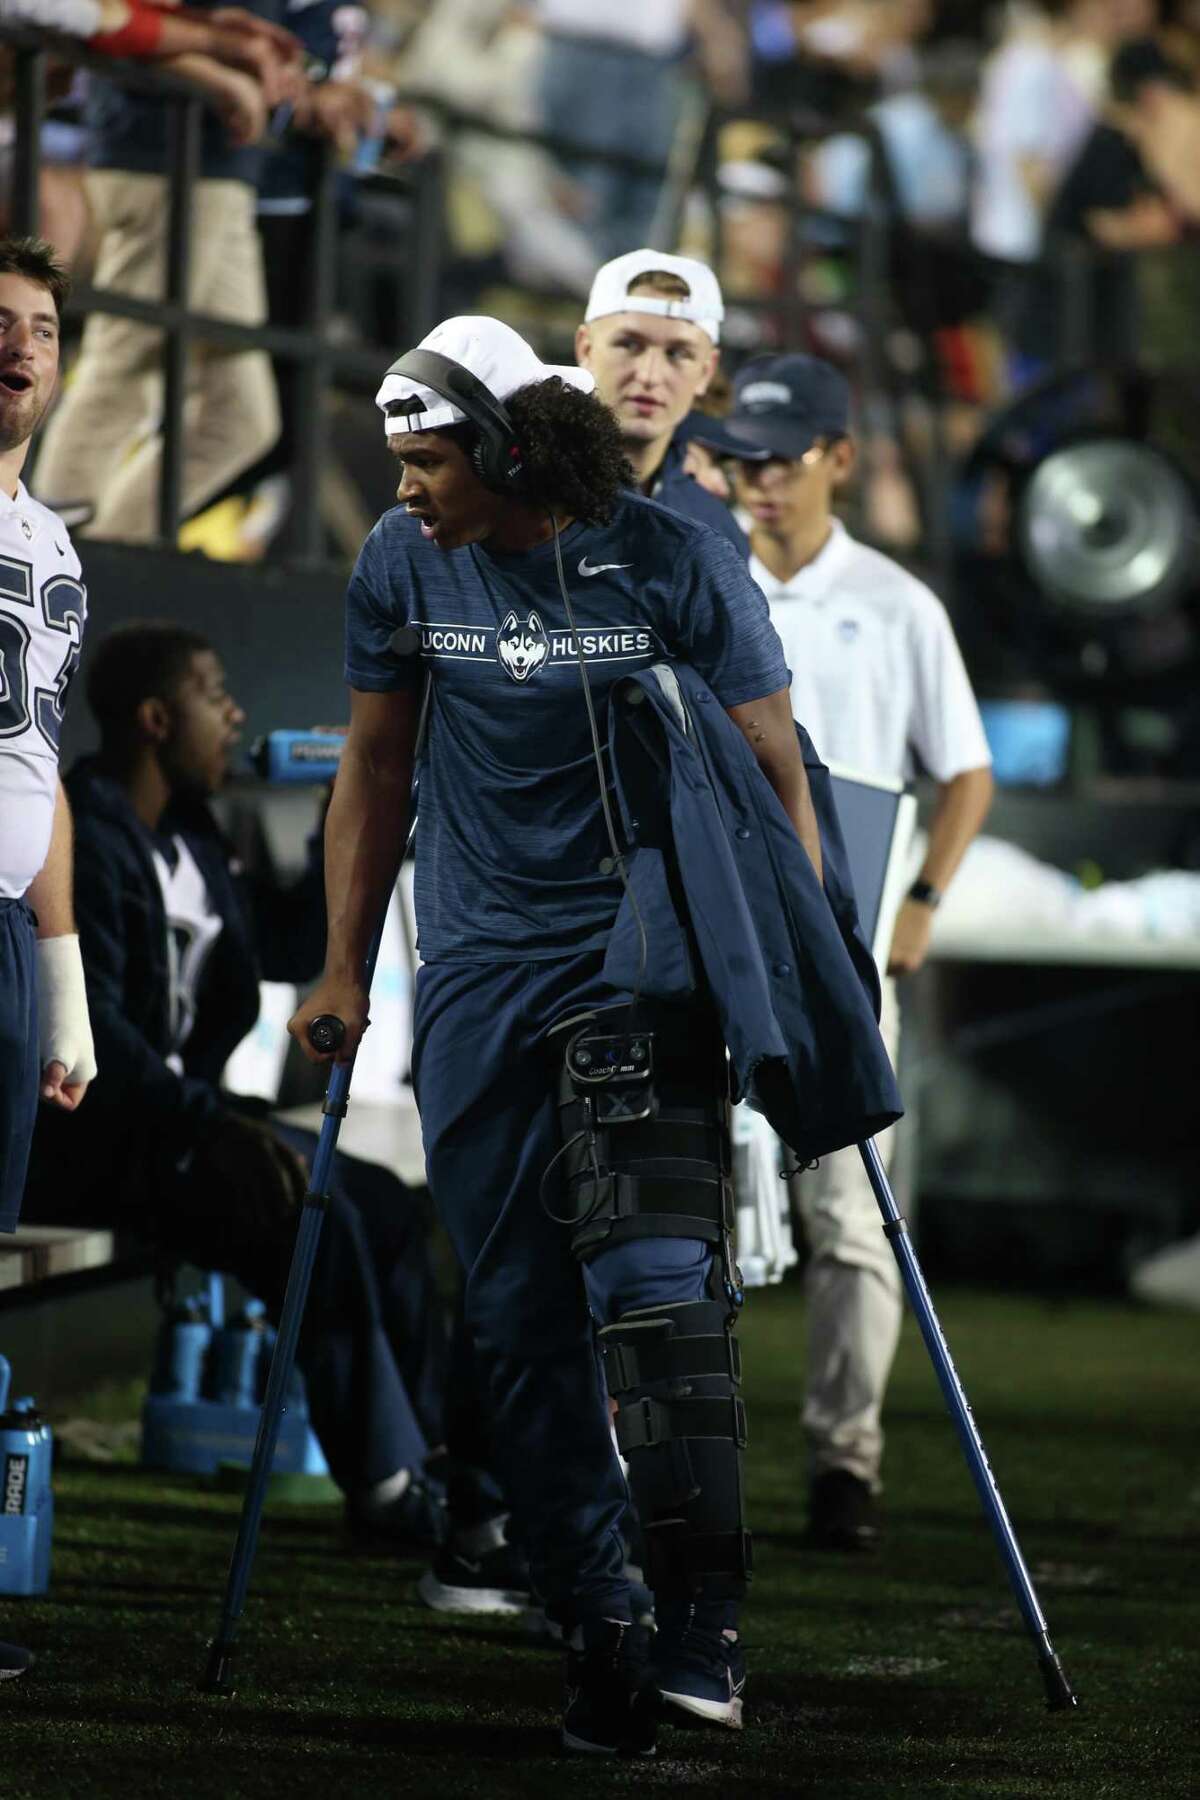 NASHVILLE, TN - OCTOBER 02: Connecticut Huskies quarterback Tyler Phommachanh (12) walks the sideline on crutches after suffering a knee injury during a game between the Vanderbilt Commodores and Connecticut Huskies, October 2, 2021, at Vanderbilt Stadium in Nashville, Tennessee. (Photo by Matthew Maxey/Icon Sportswire via Getty Images)